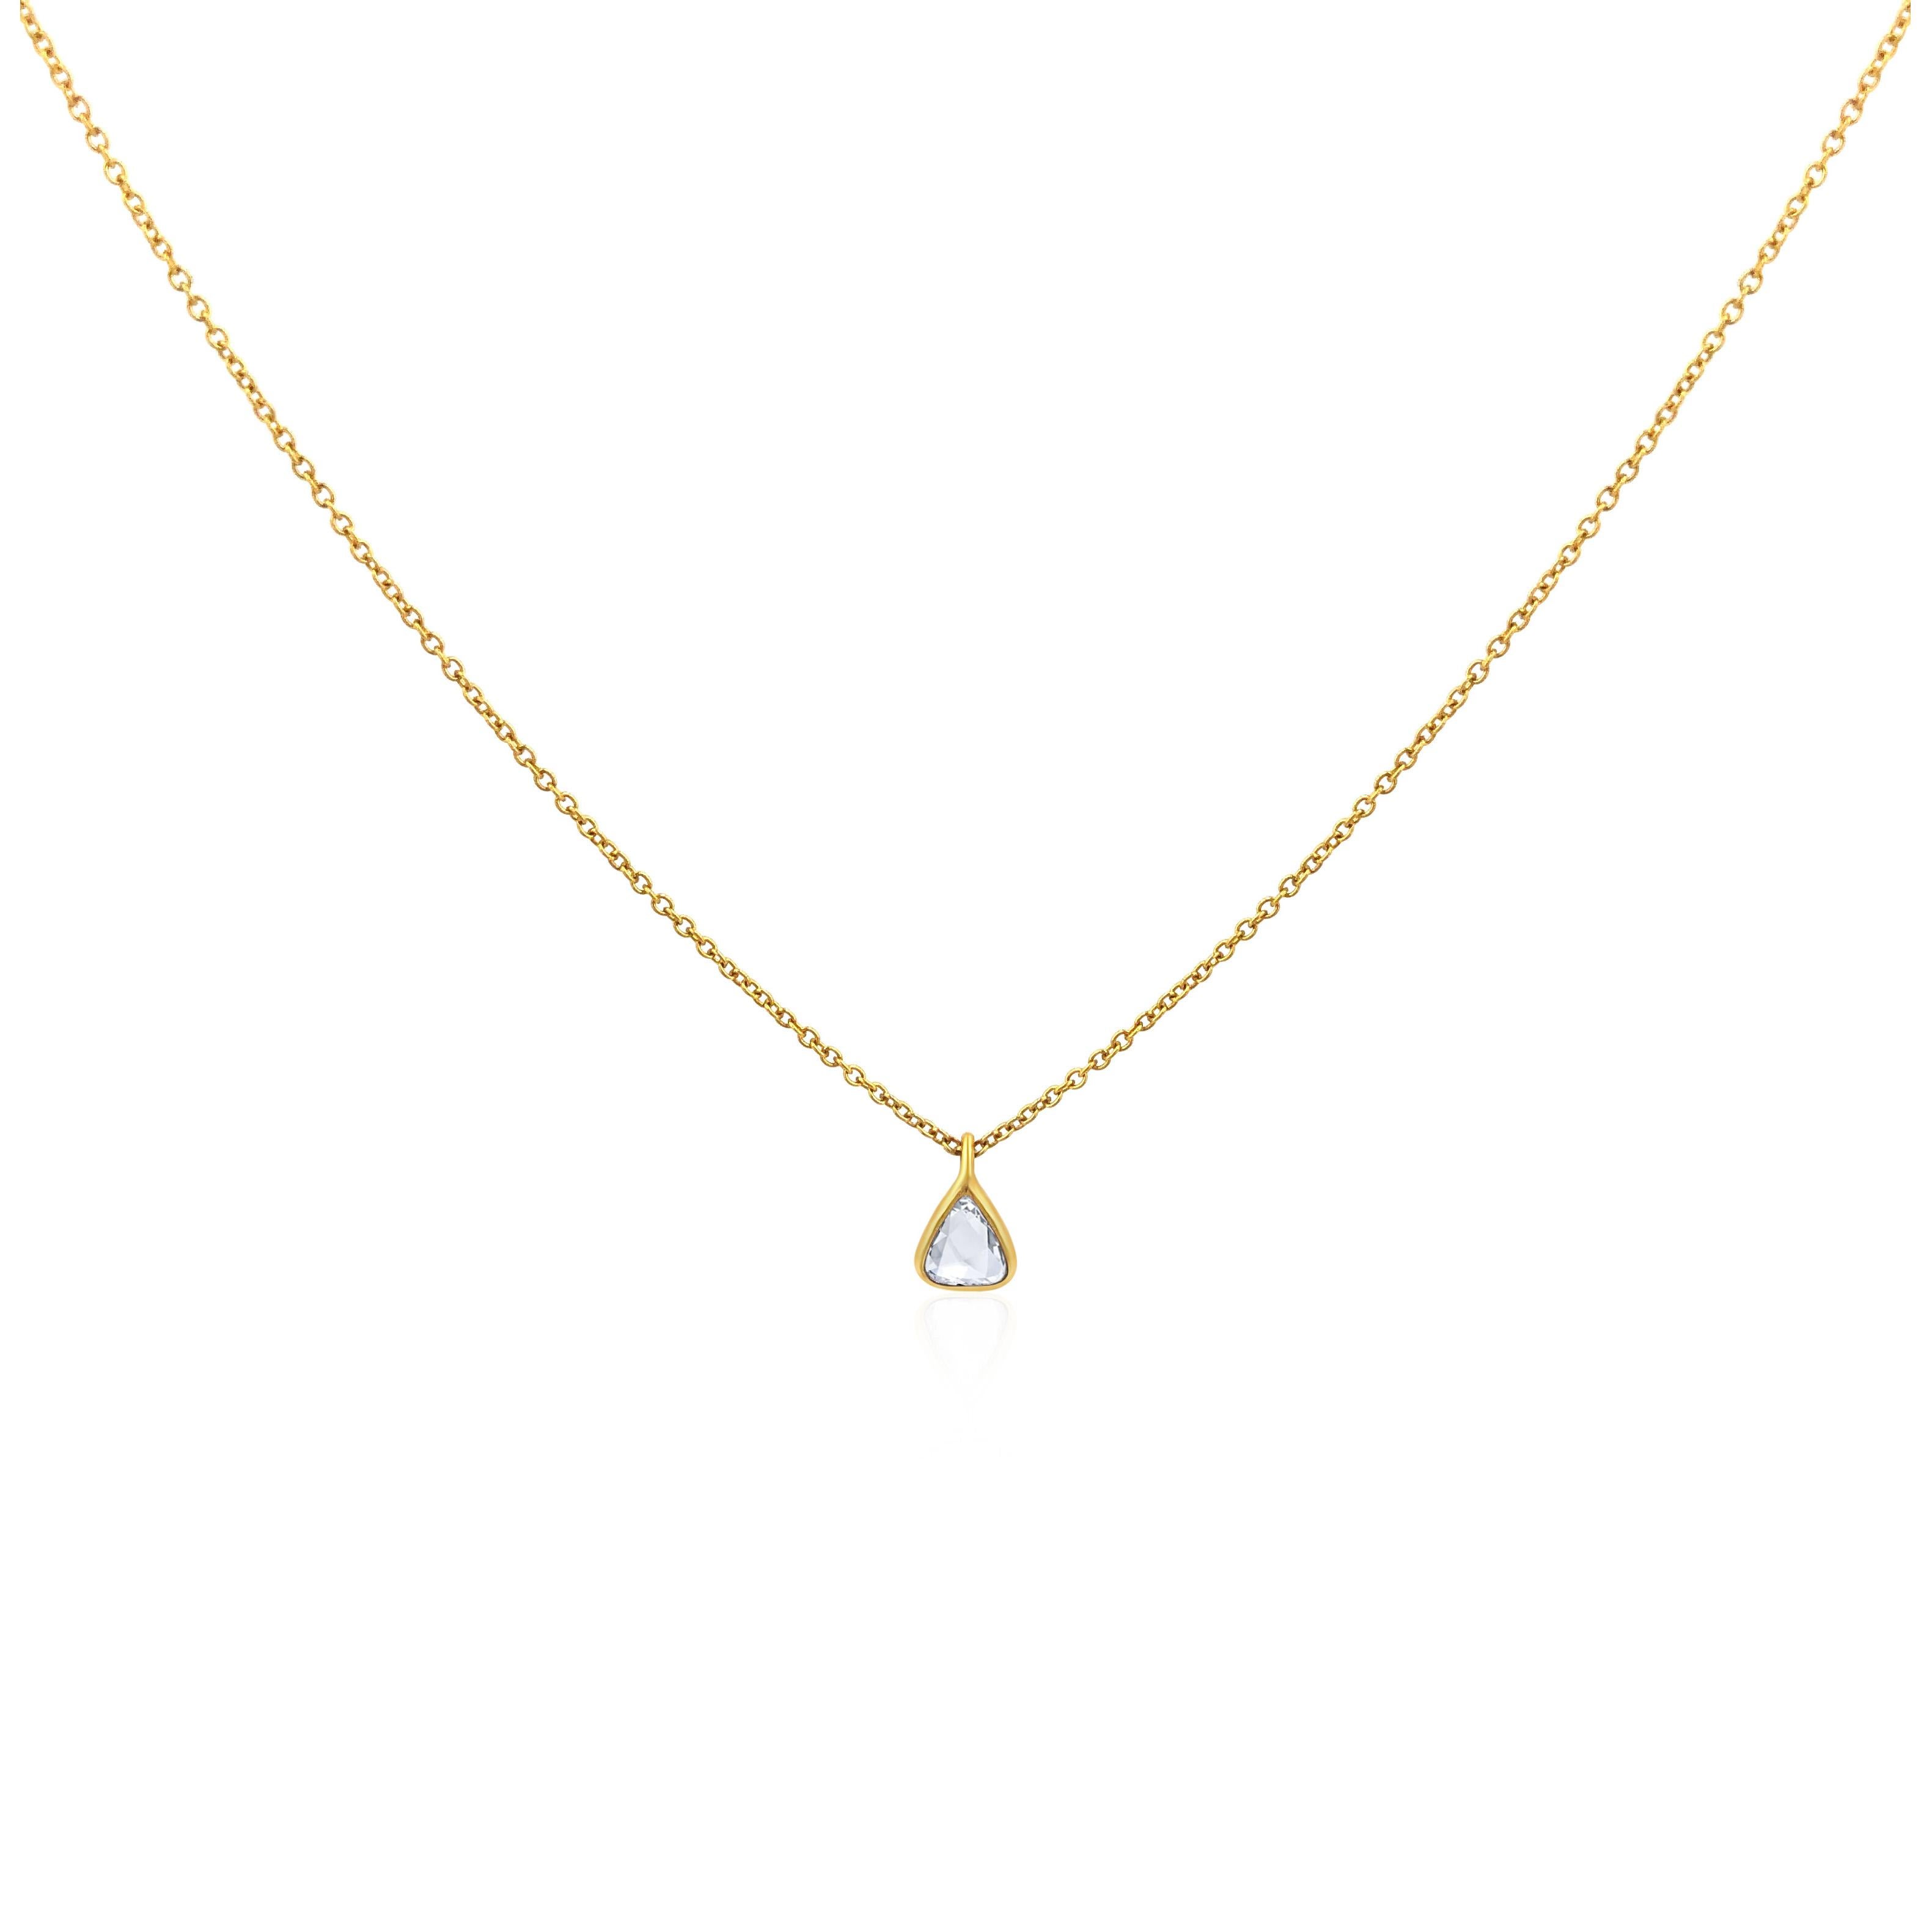 Rock & Divine Dawn Collection Sun Drop Diamond Necklace 18K Yellow Gold 0.25 CTW

PRIMARY DETAILS
SKU: 102467
Listing Title: Rock & Divine Dawn Collection Sun Drop Diamond Necklace 18K Yellow Gold 0.25 CTW
Condition Description: Retails for 1595